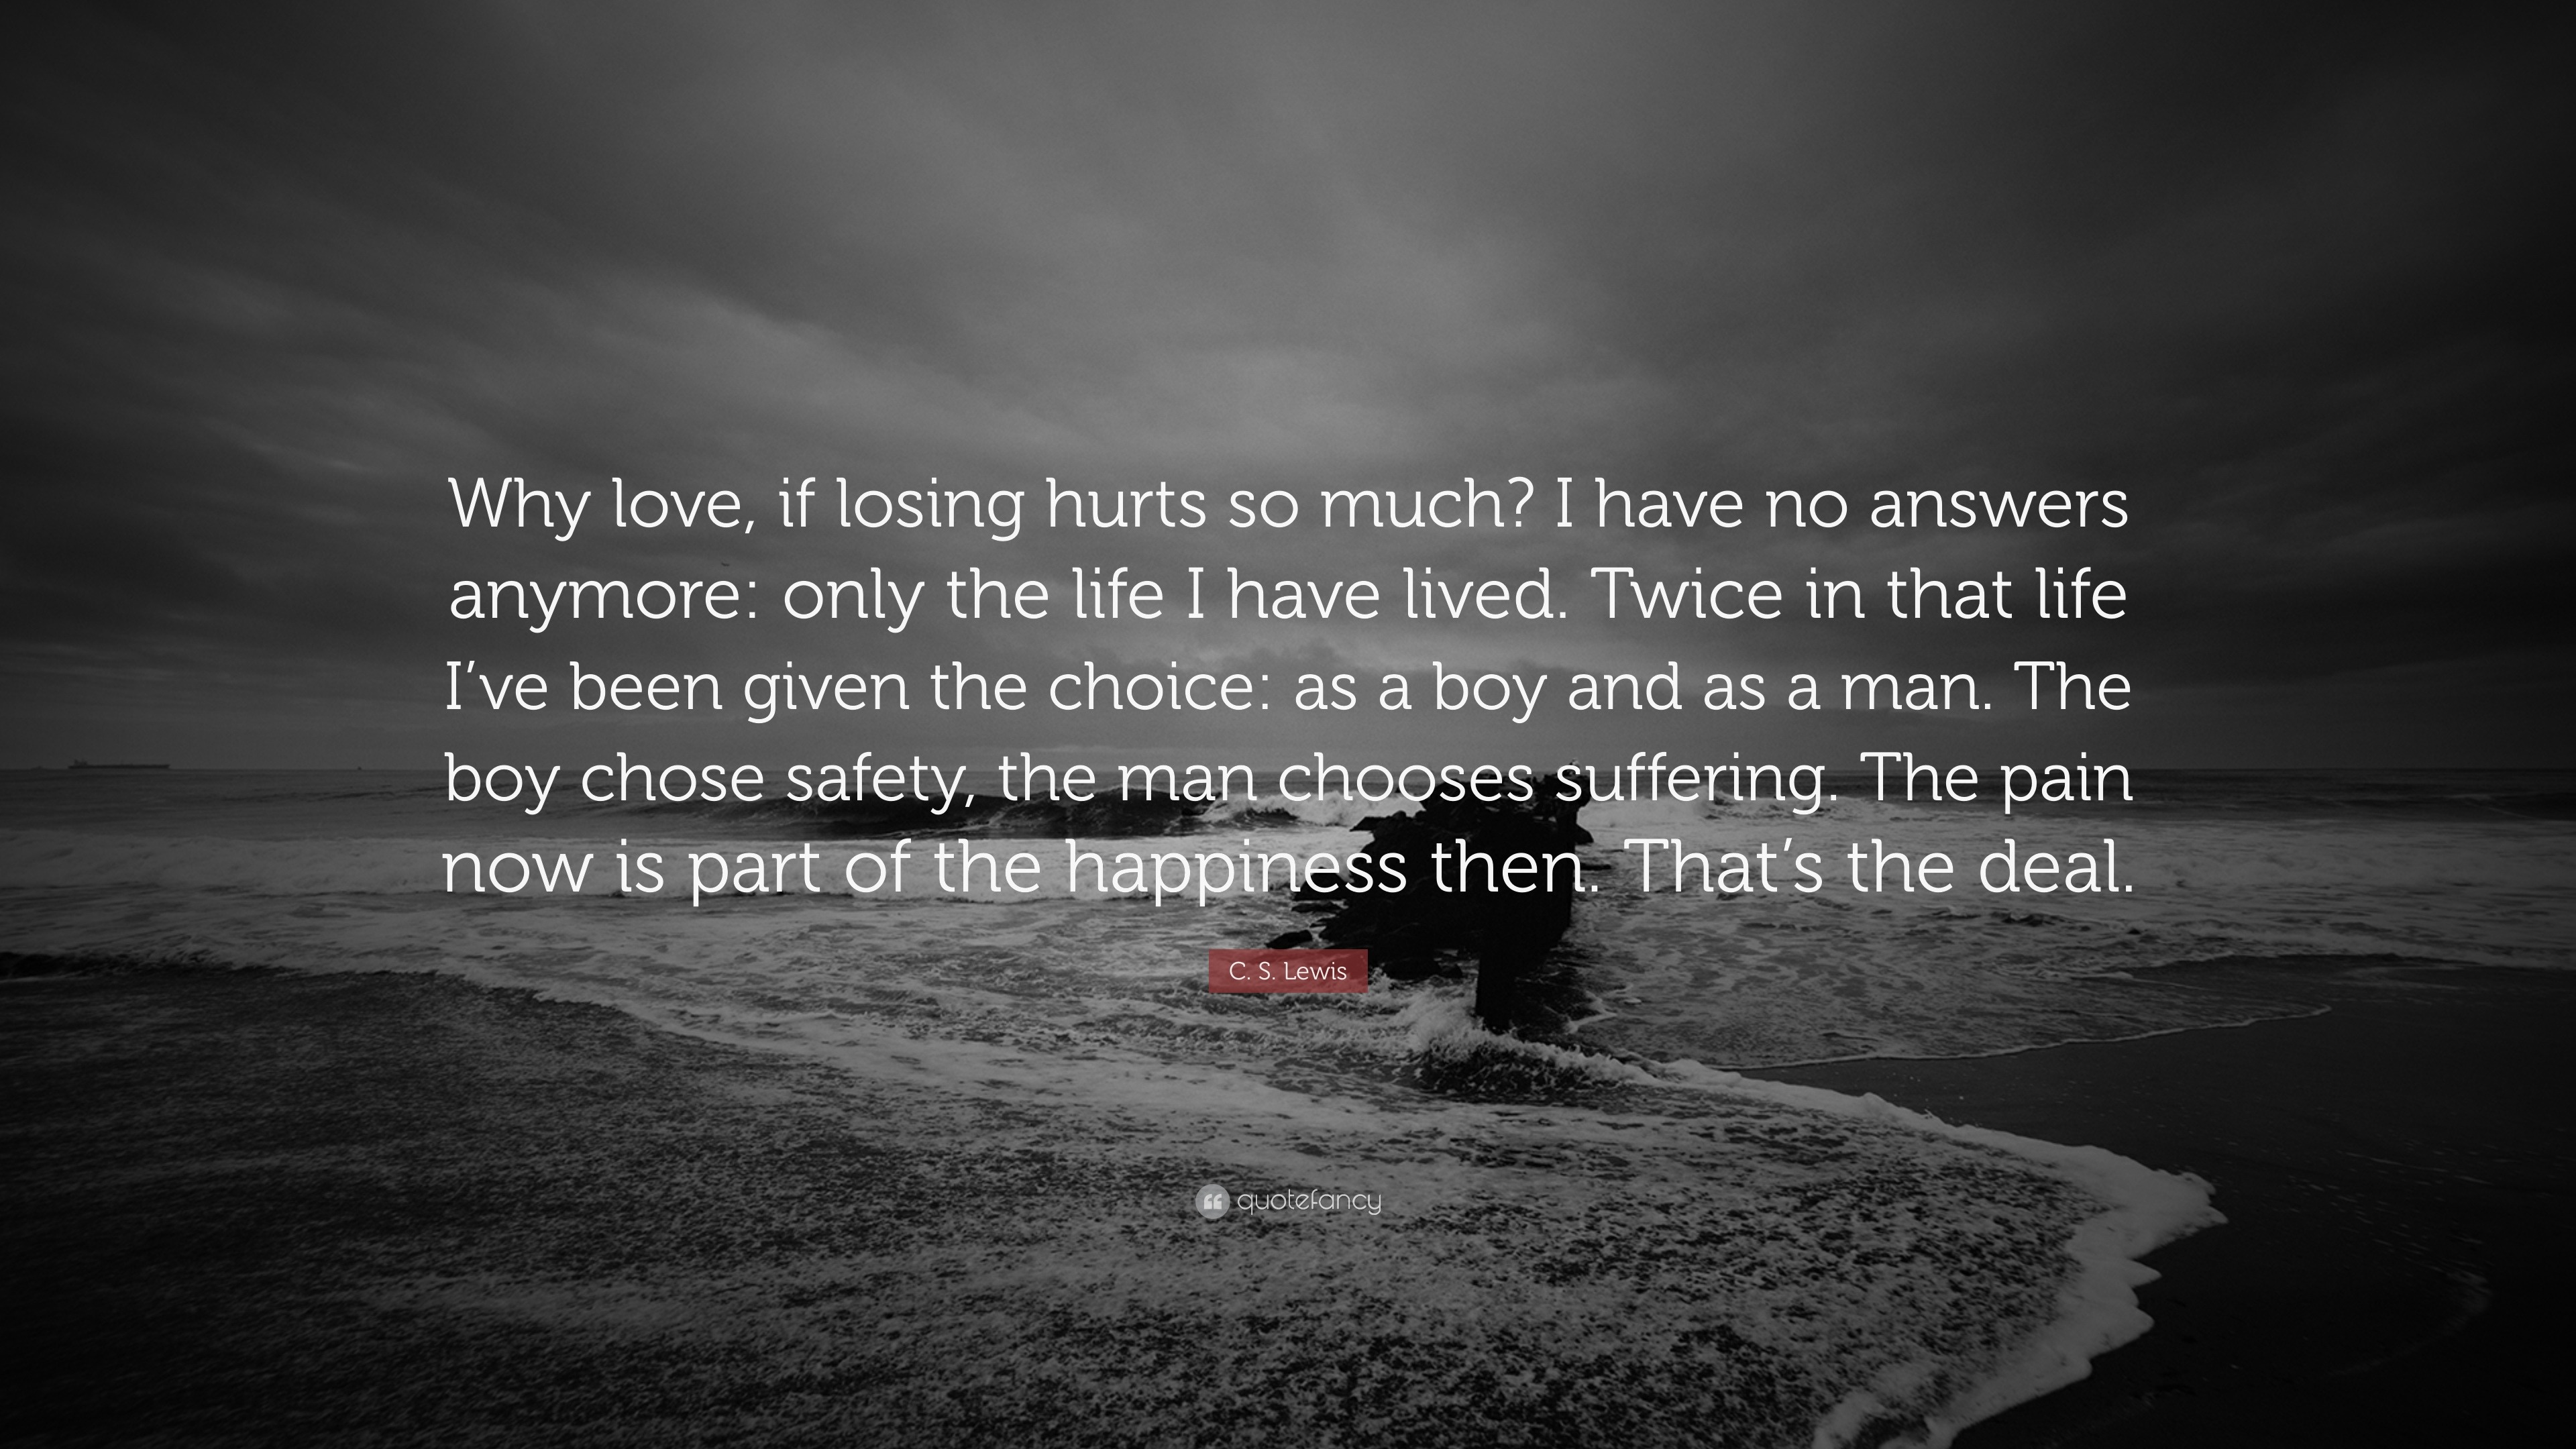 448958 C S Lewis Quote Why love if losing hurts so much I have no answers